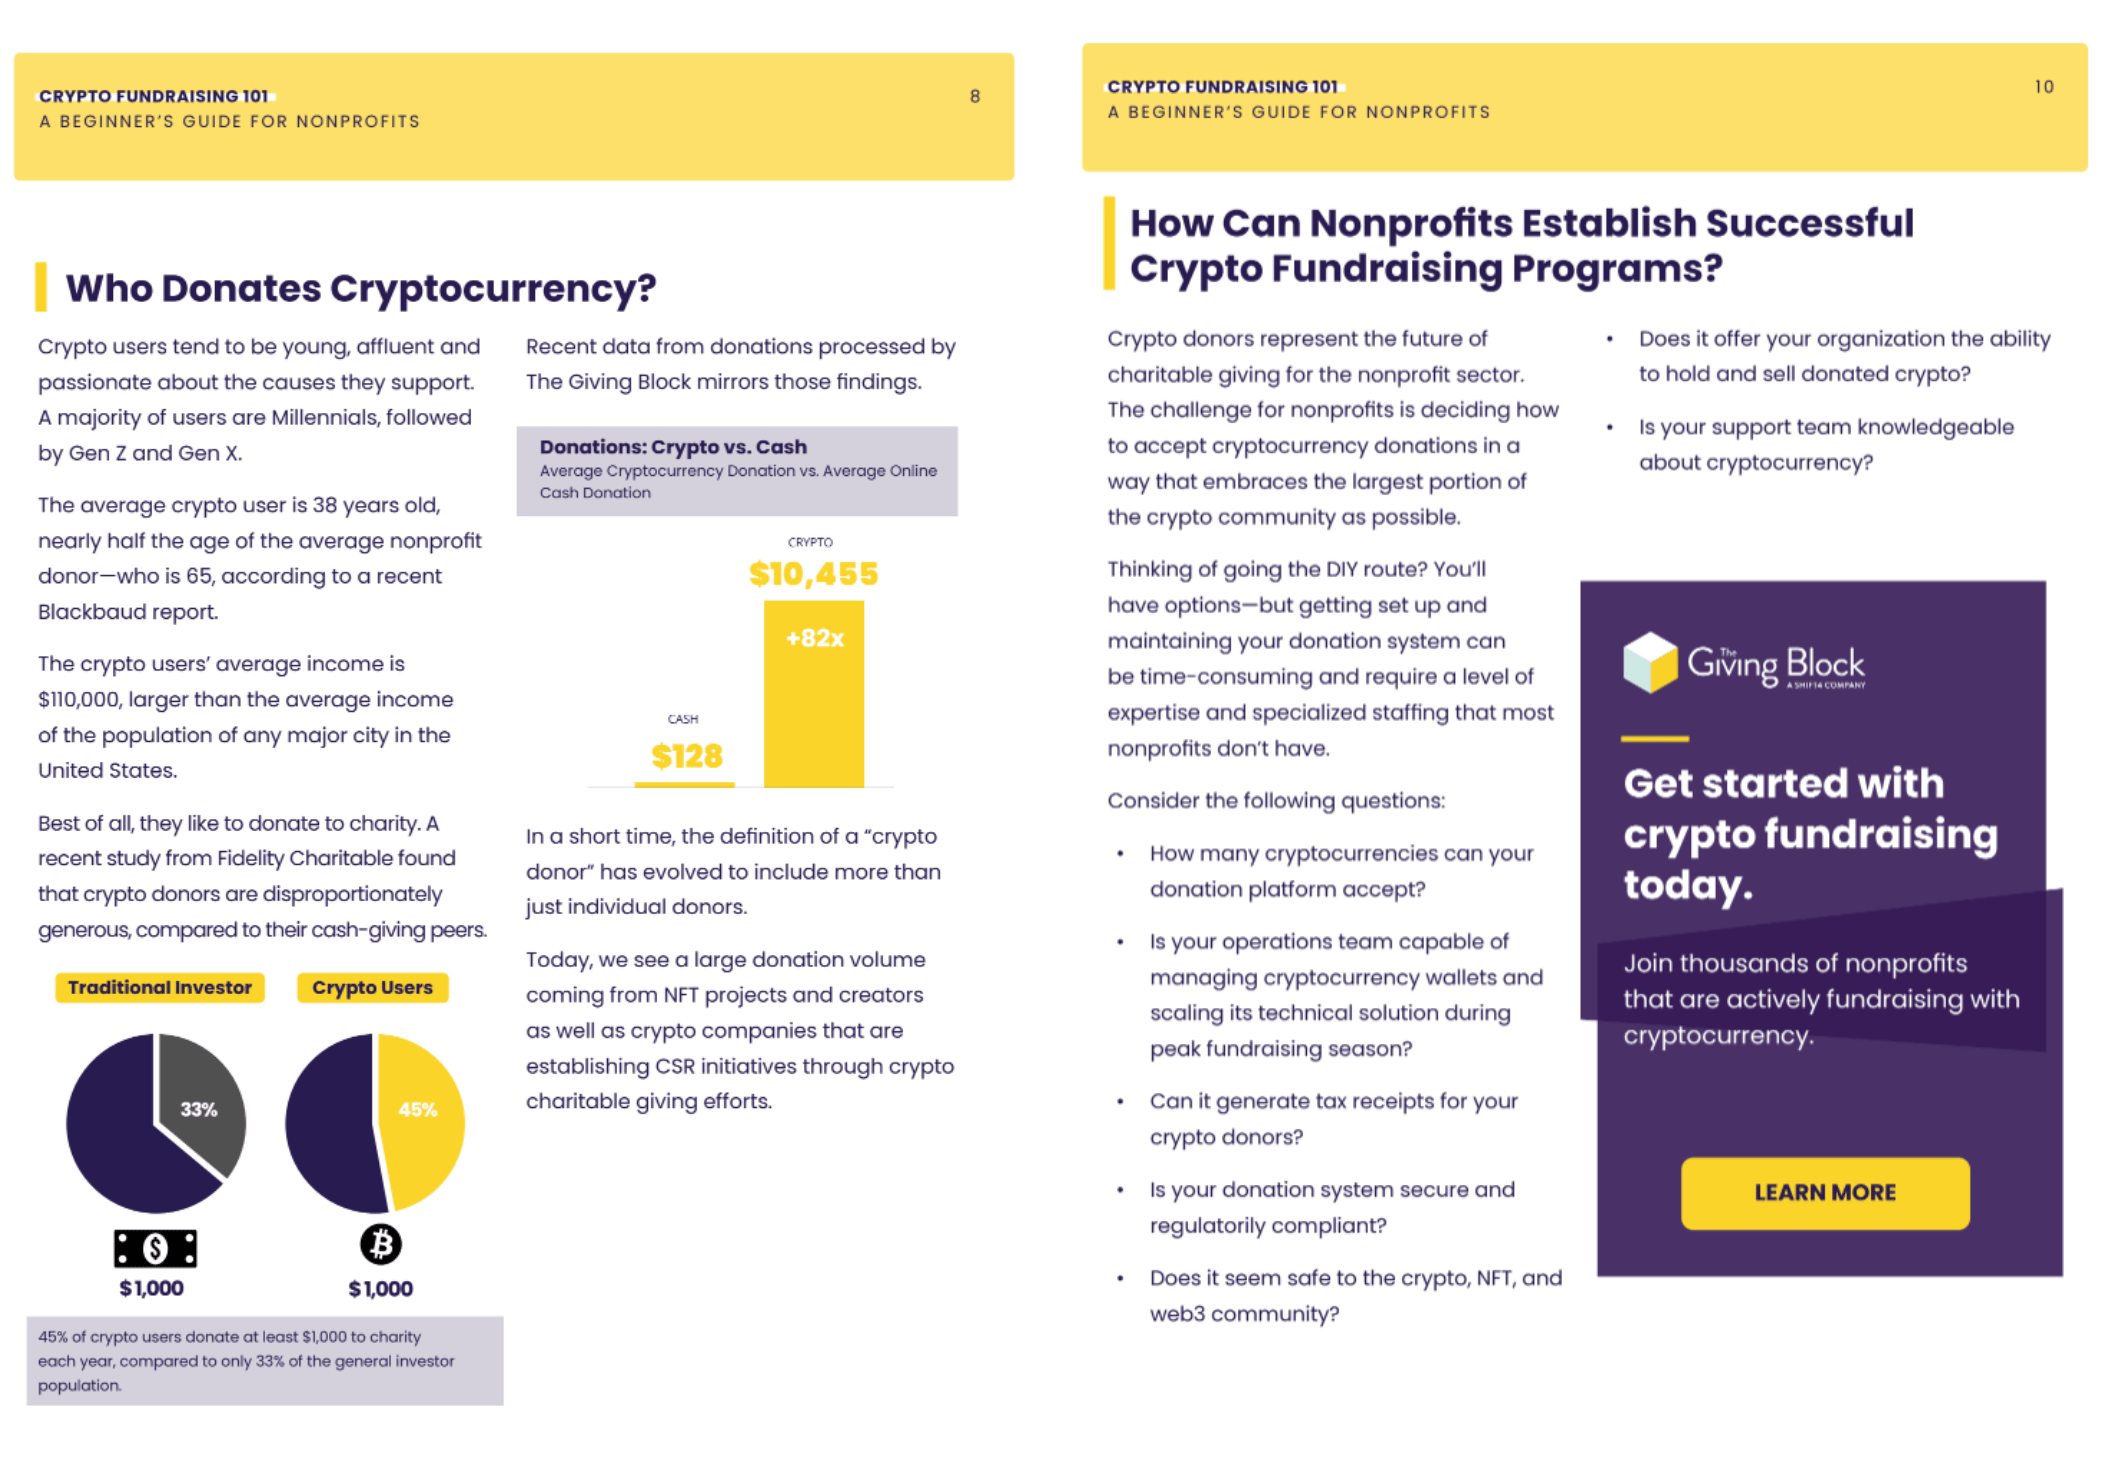 Sample images from Crypto Fundraising 101 guide for nonprofits prepared by The Giving Block